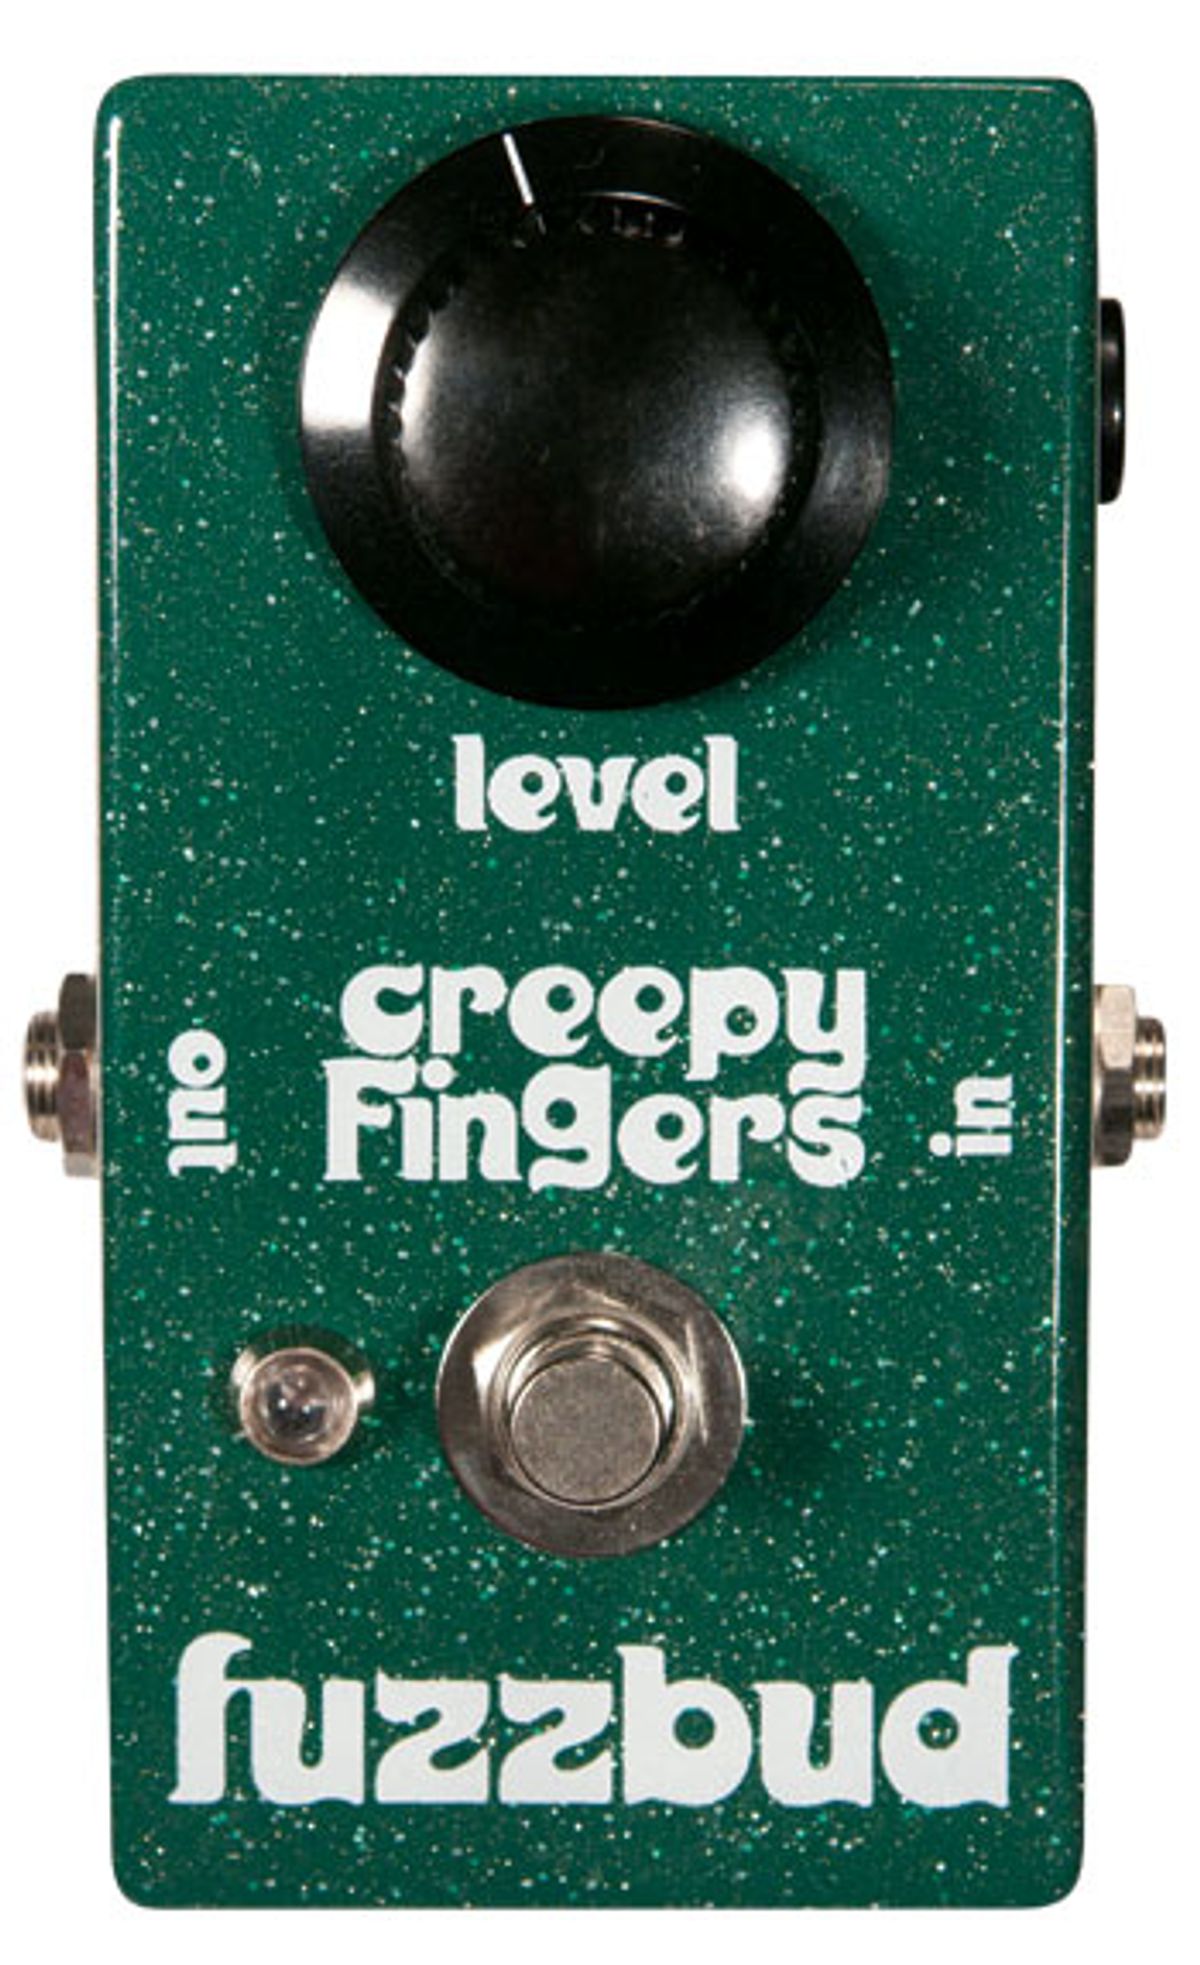 Creepy Fingers Effects Fuzzbud Pedal Review